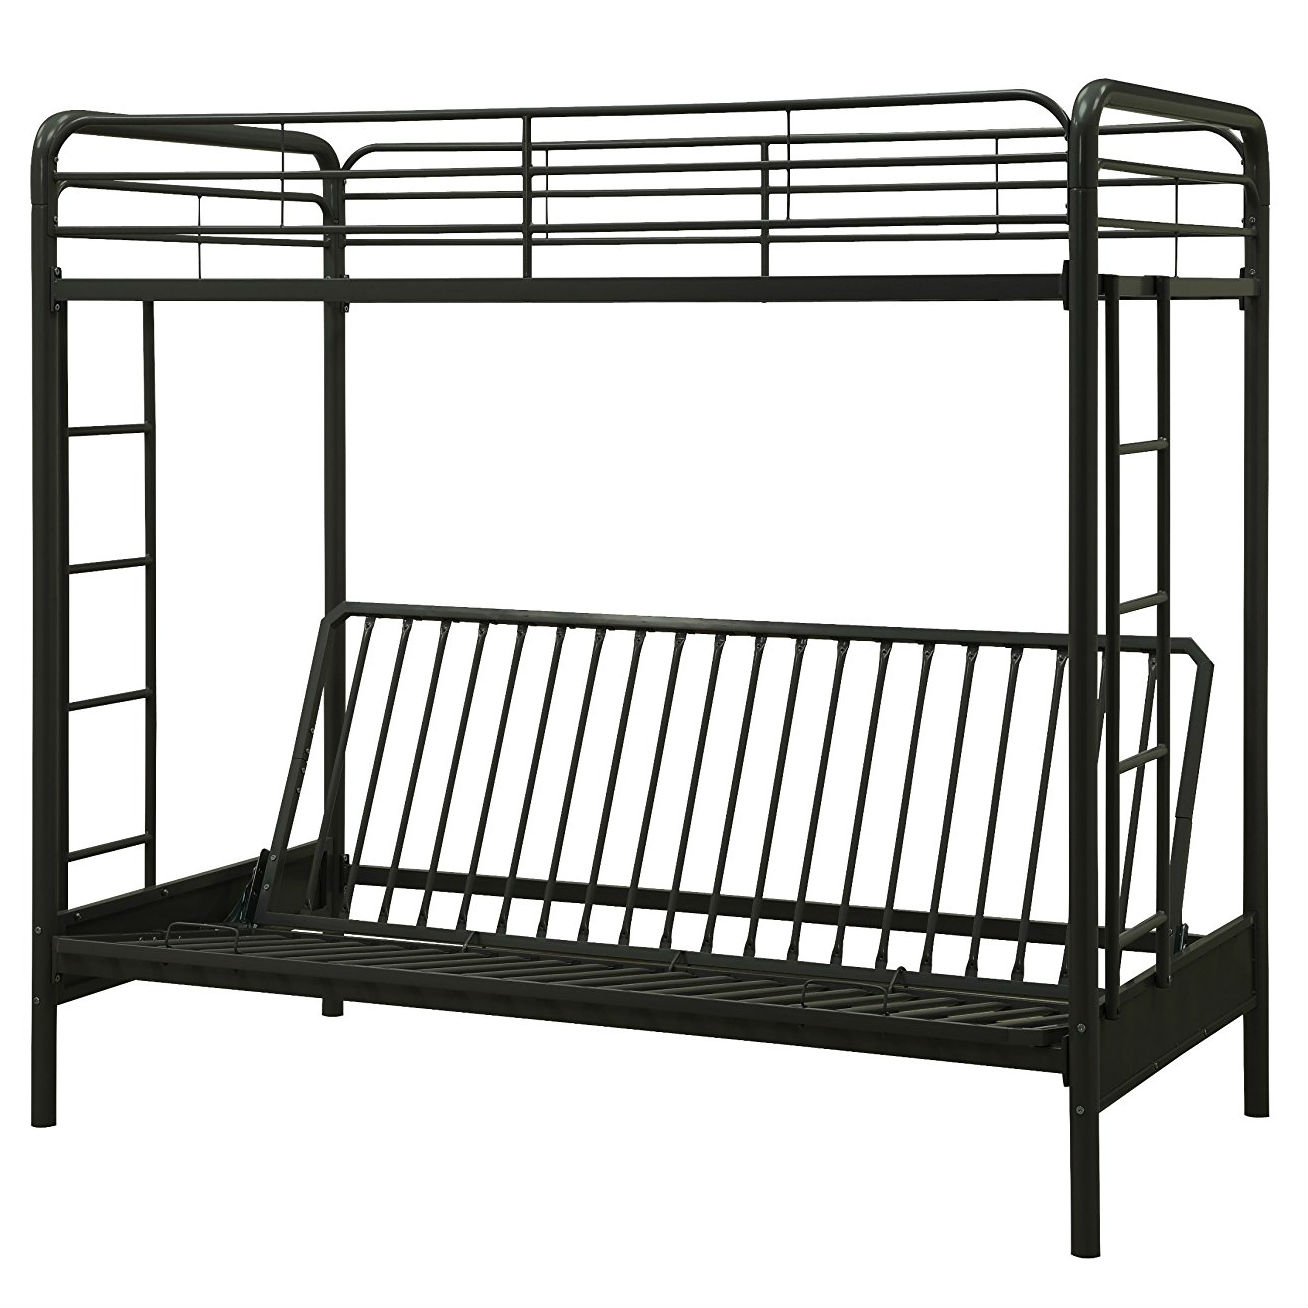 Futon Metal Bunk Bed Frame, Twin Over Full Futon Bunk Bed